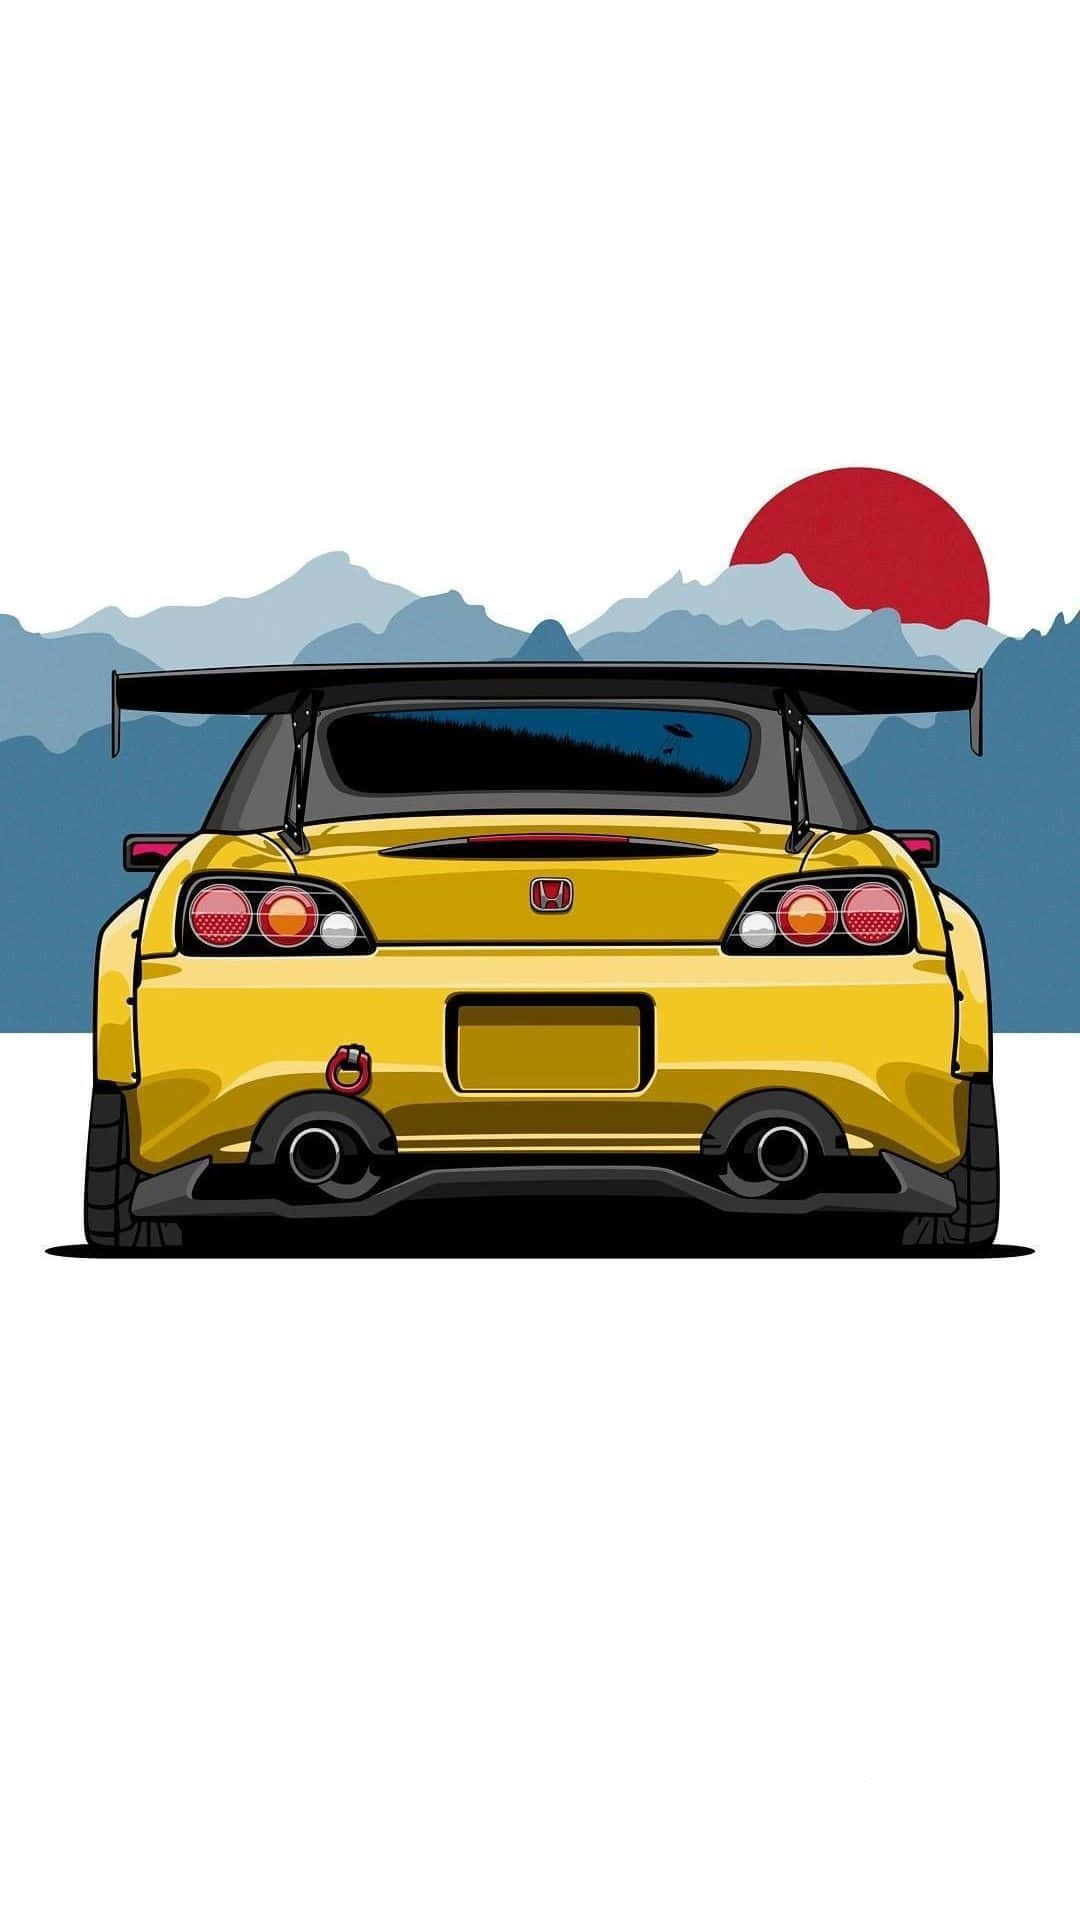 A Yellow Sports Car With A Mountain In The Background Wallpaper